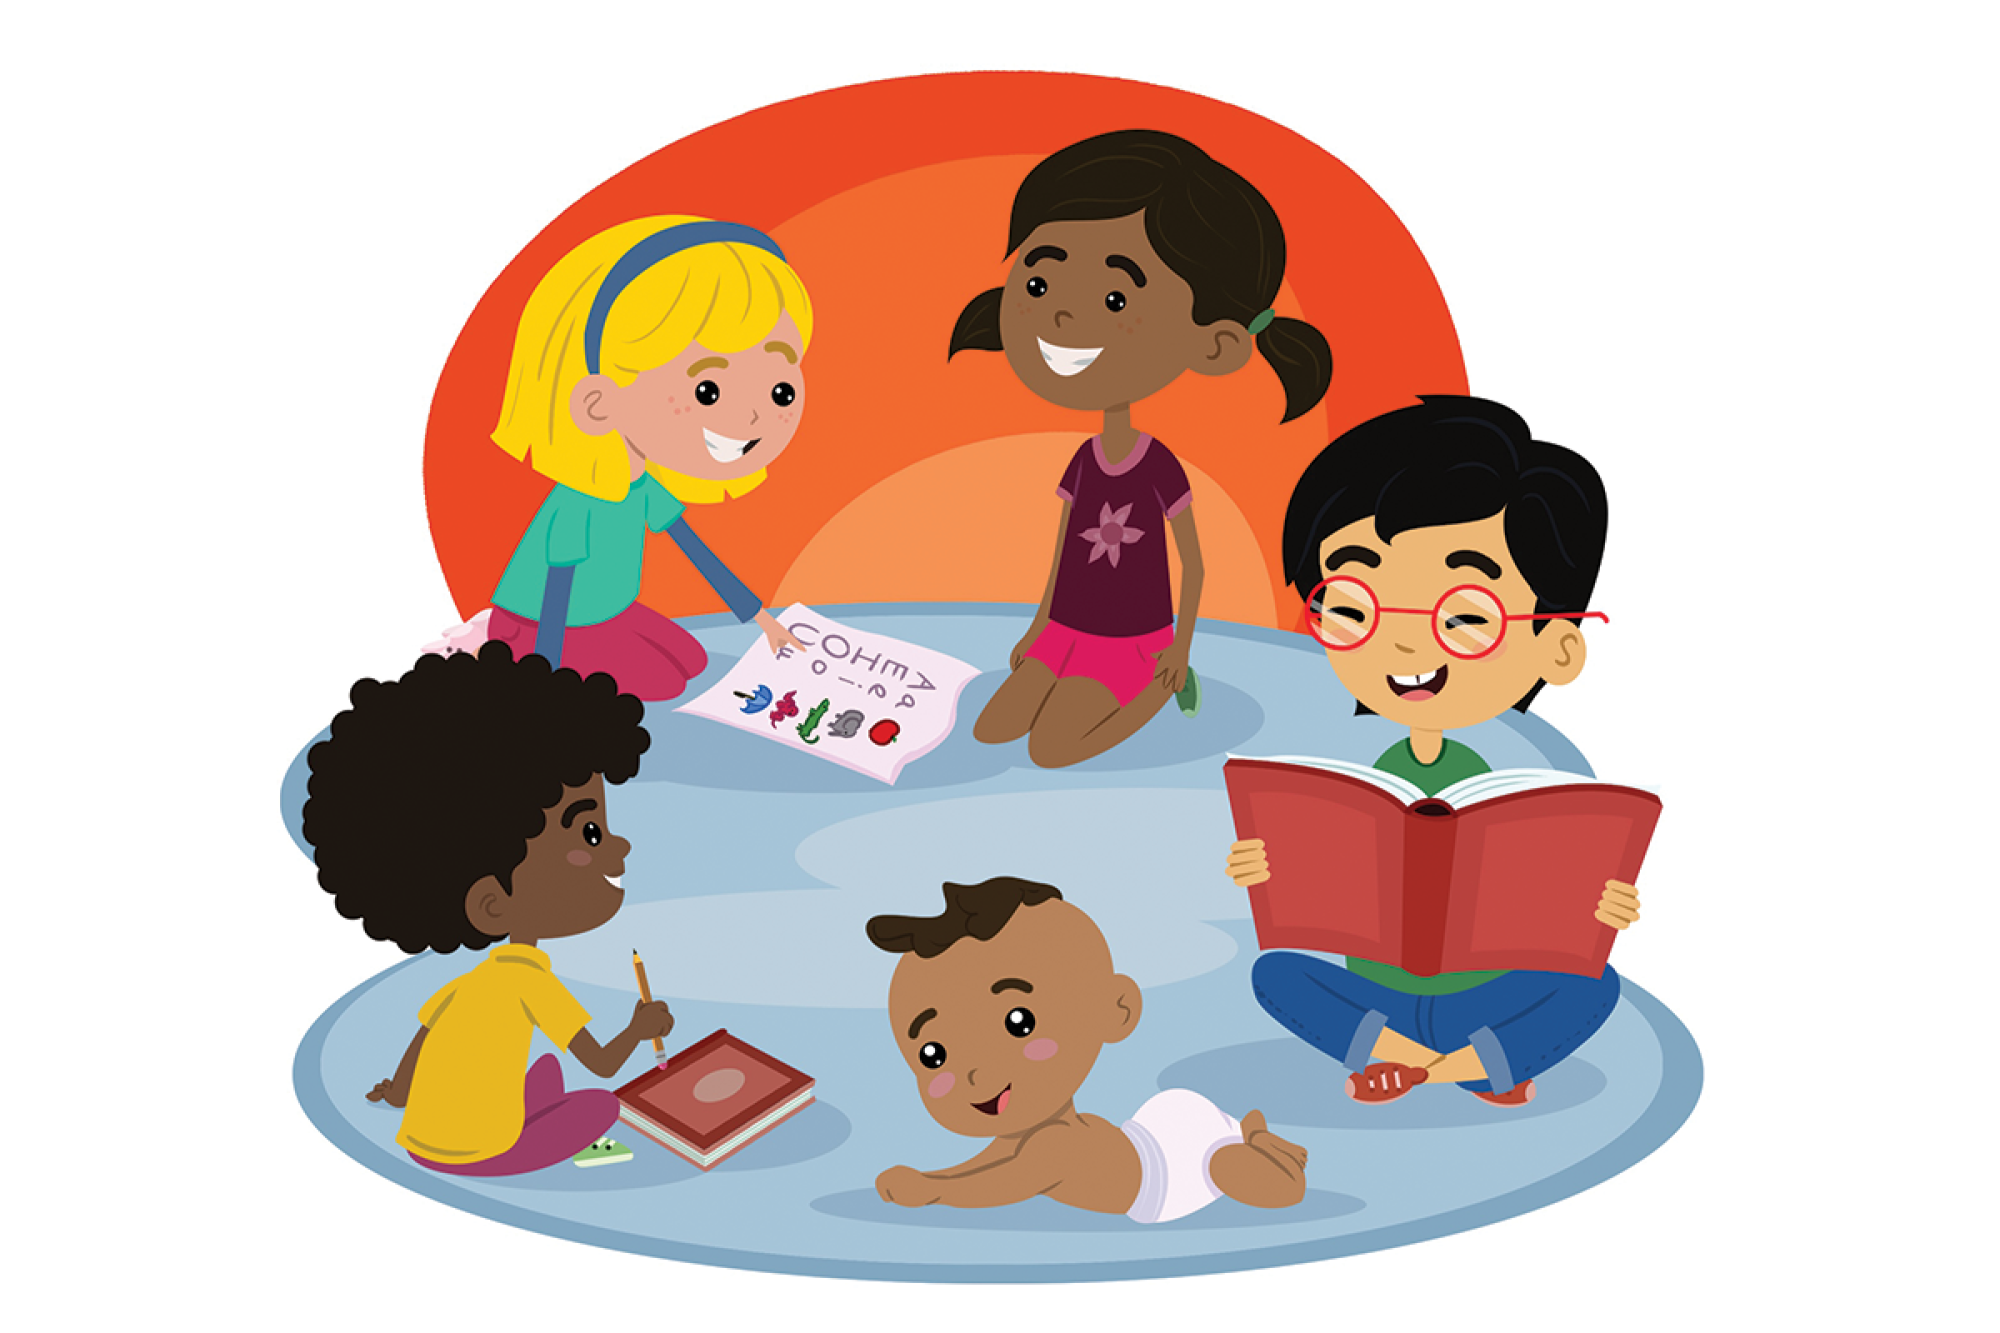 An illustration of babies and toddlers sitting on a rug and playing with books.